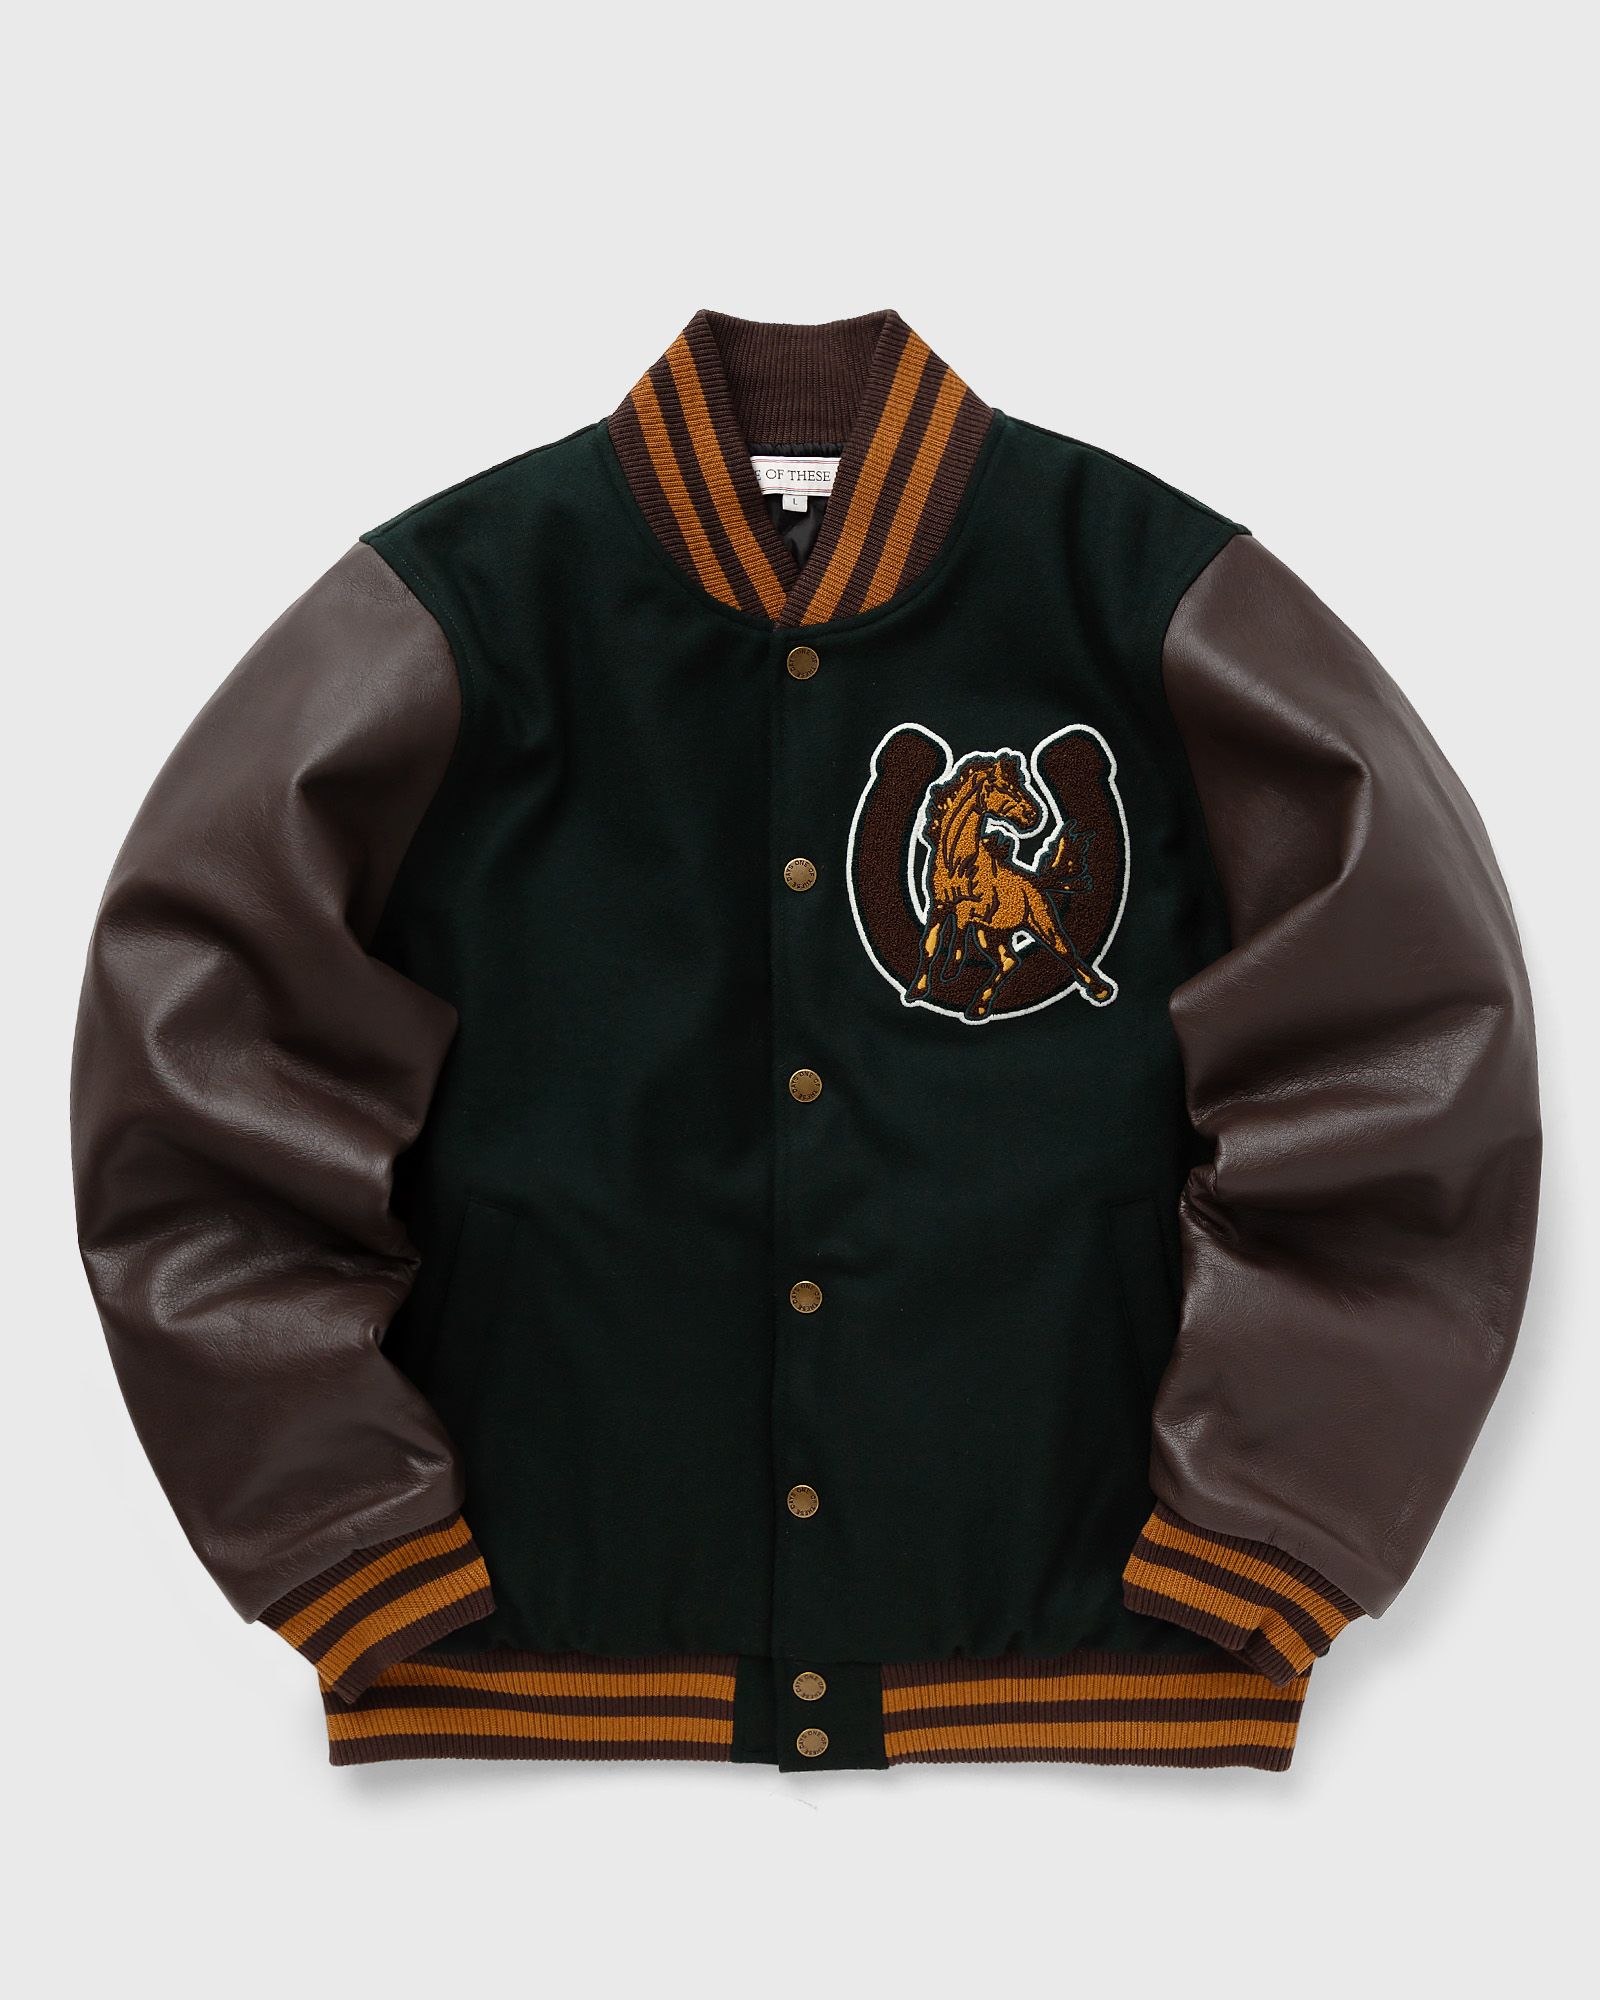 One of these Days - mustang varsity men bomber jackets|college jackets brown|green in größe:xl